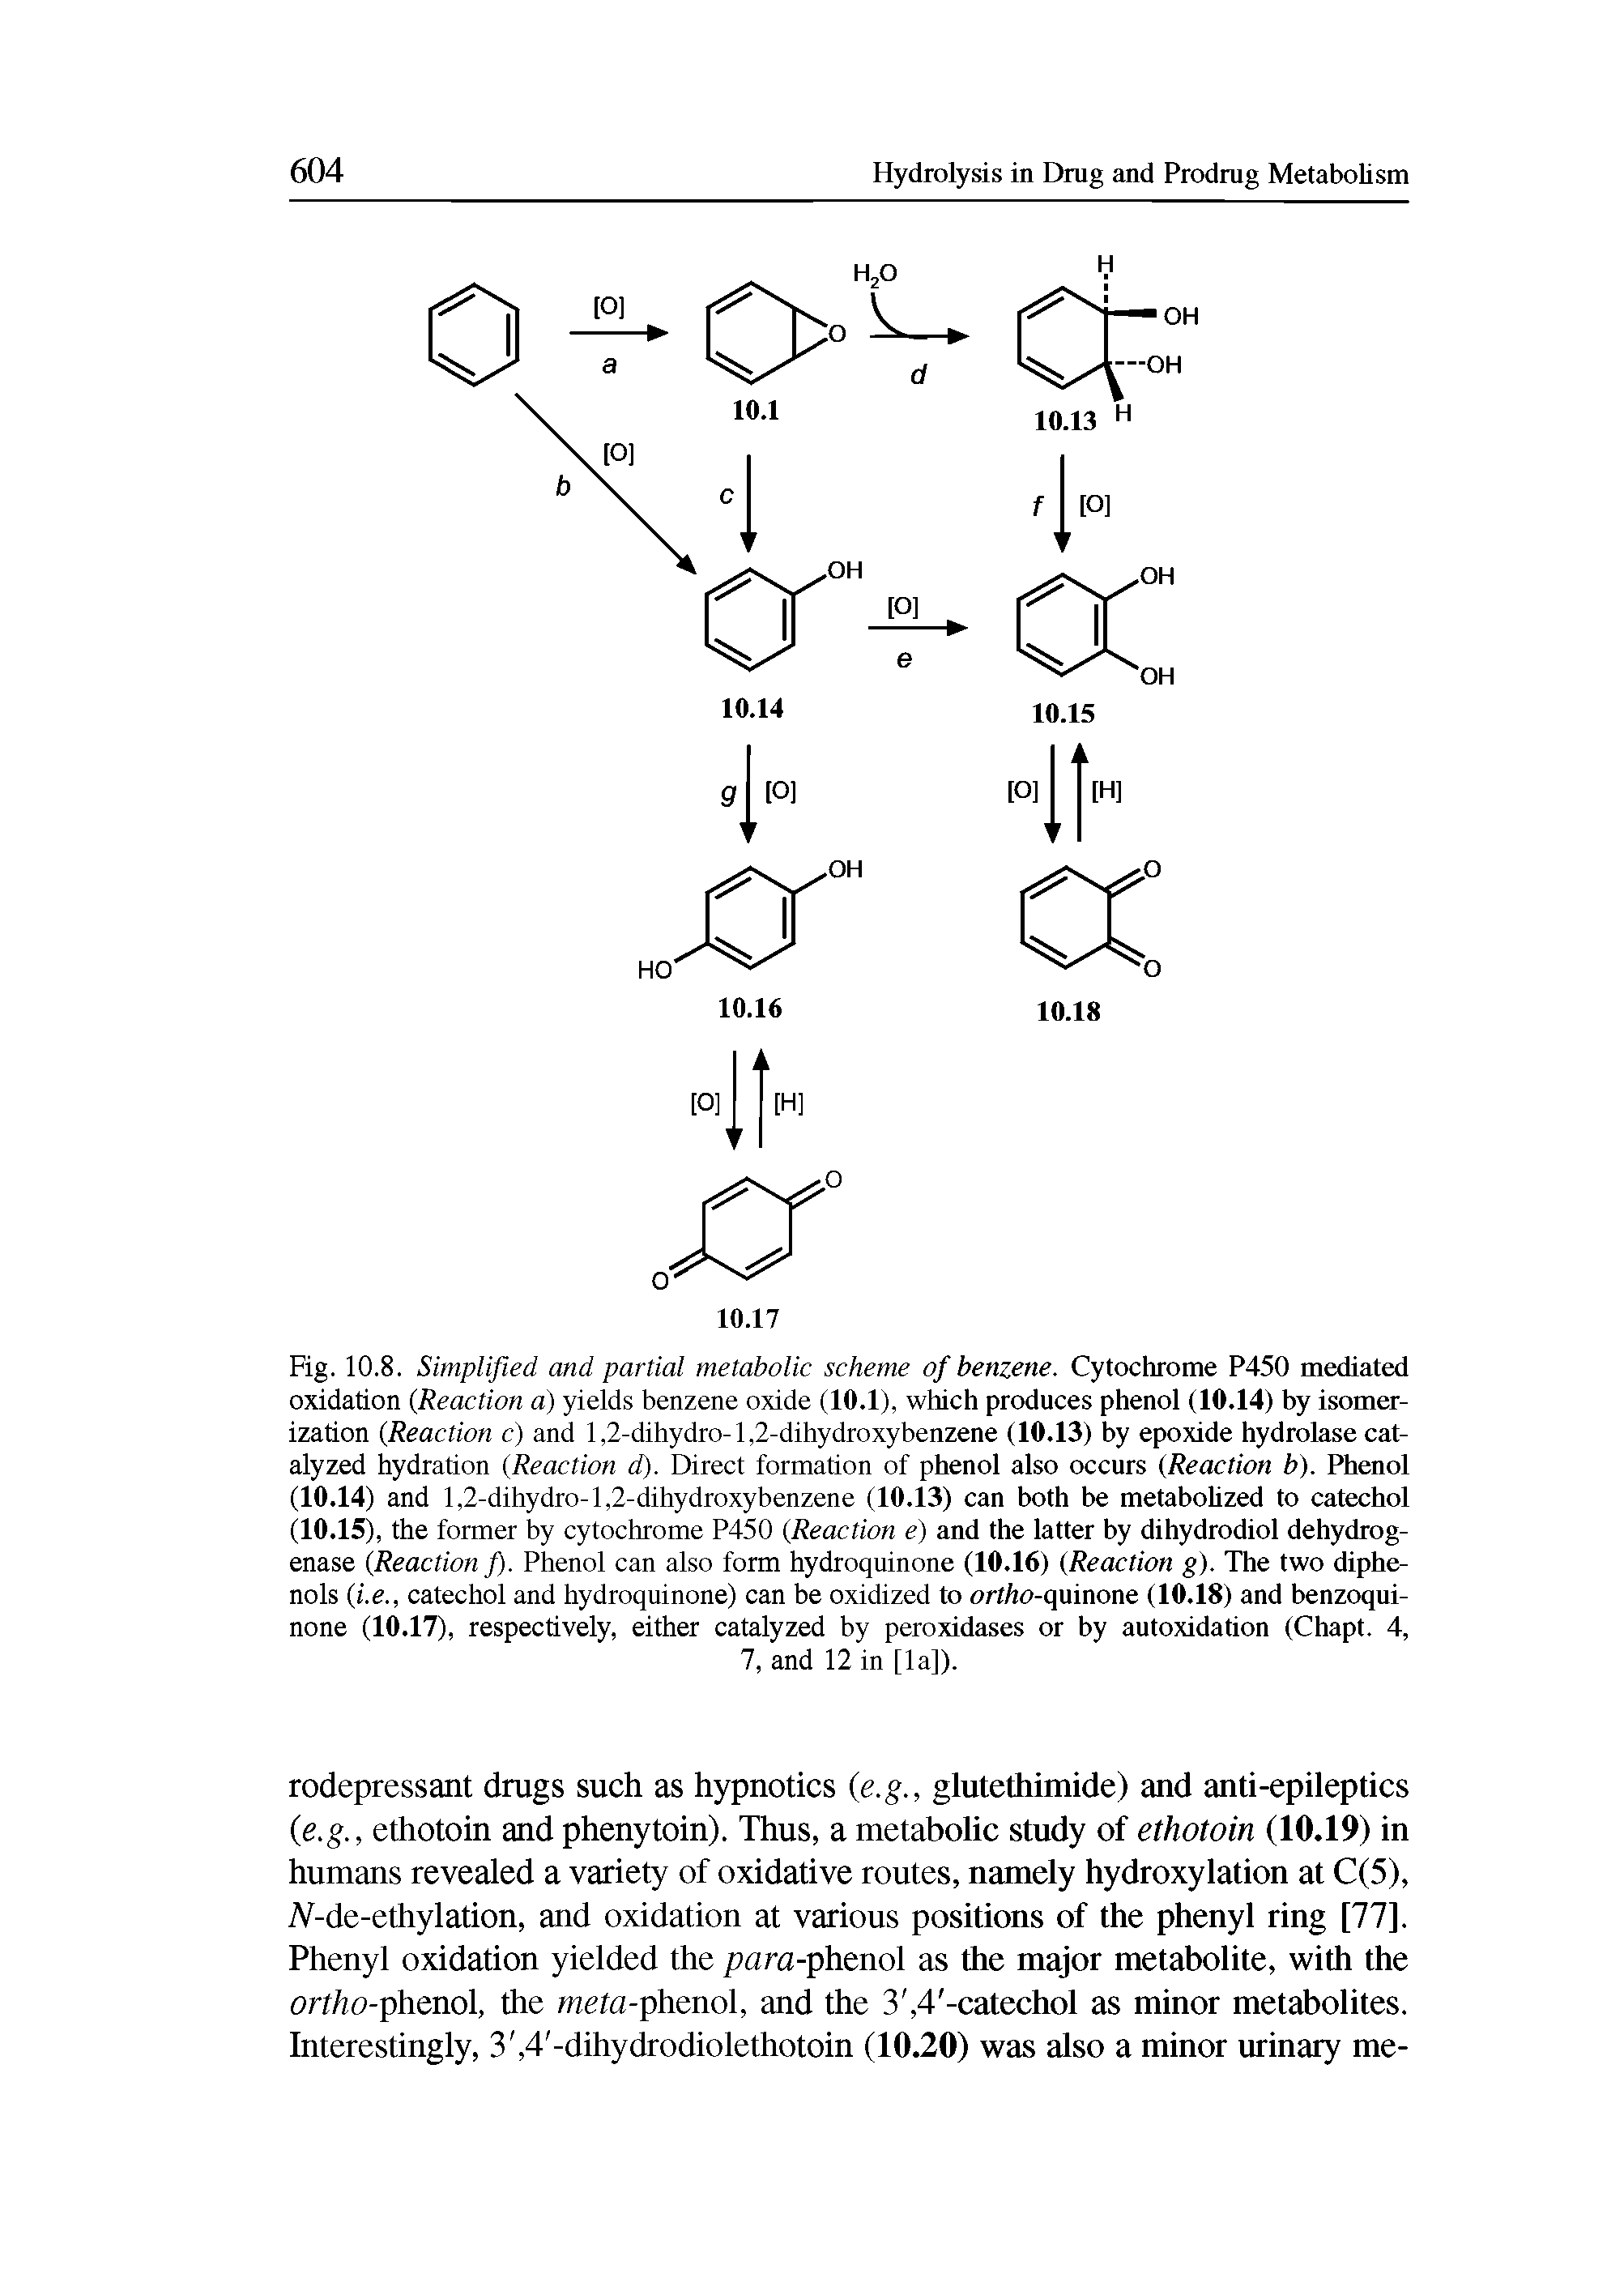 Fig. 10.8. Simplified and partial metabolic scheme of benzene. Cytochrome P450 mediated oxidation (Reaction a) yields benzene oxide (10.1), which produces phenol (10.14) by isomerization (Reaction c) and 1,2-dihydro-1,2-dihydroxybenzene (10.13) by epoxide hydrolase catalyzed hydration (Reaction d). Direct formation of phenol also occurs (Reaction b). Phenol...